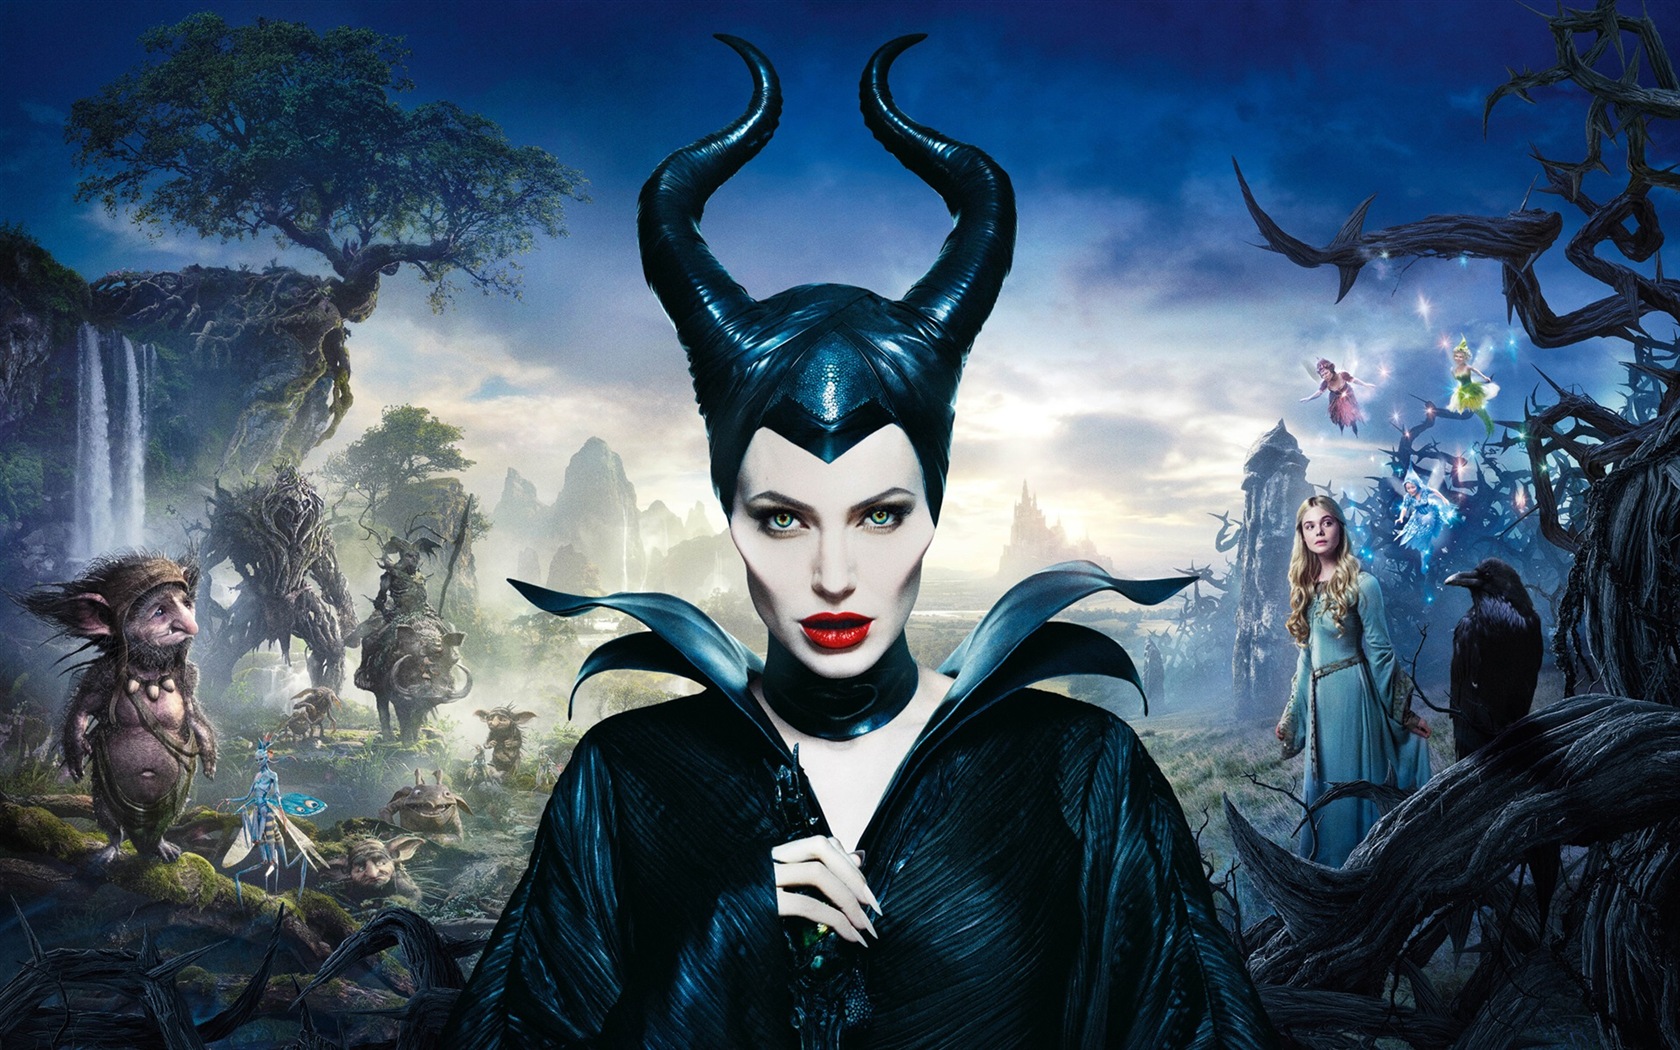 Maleficent 2014 HD movie wallpapers #6 - 1680x1050